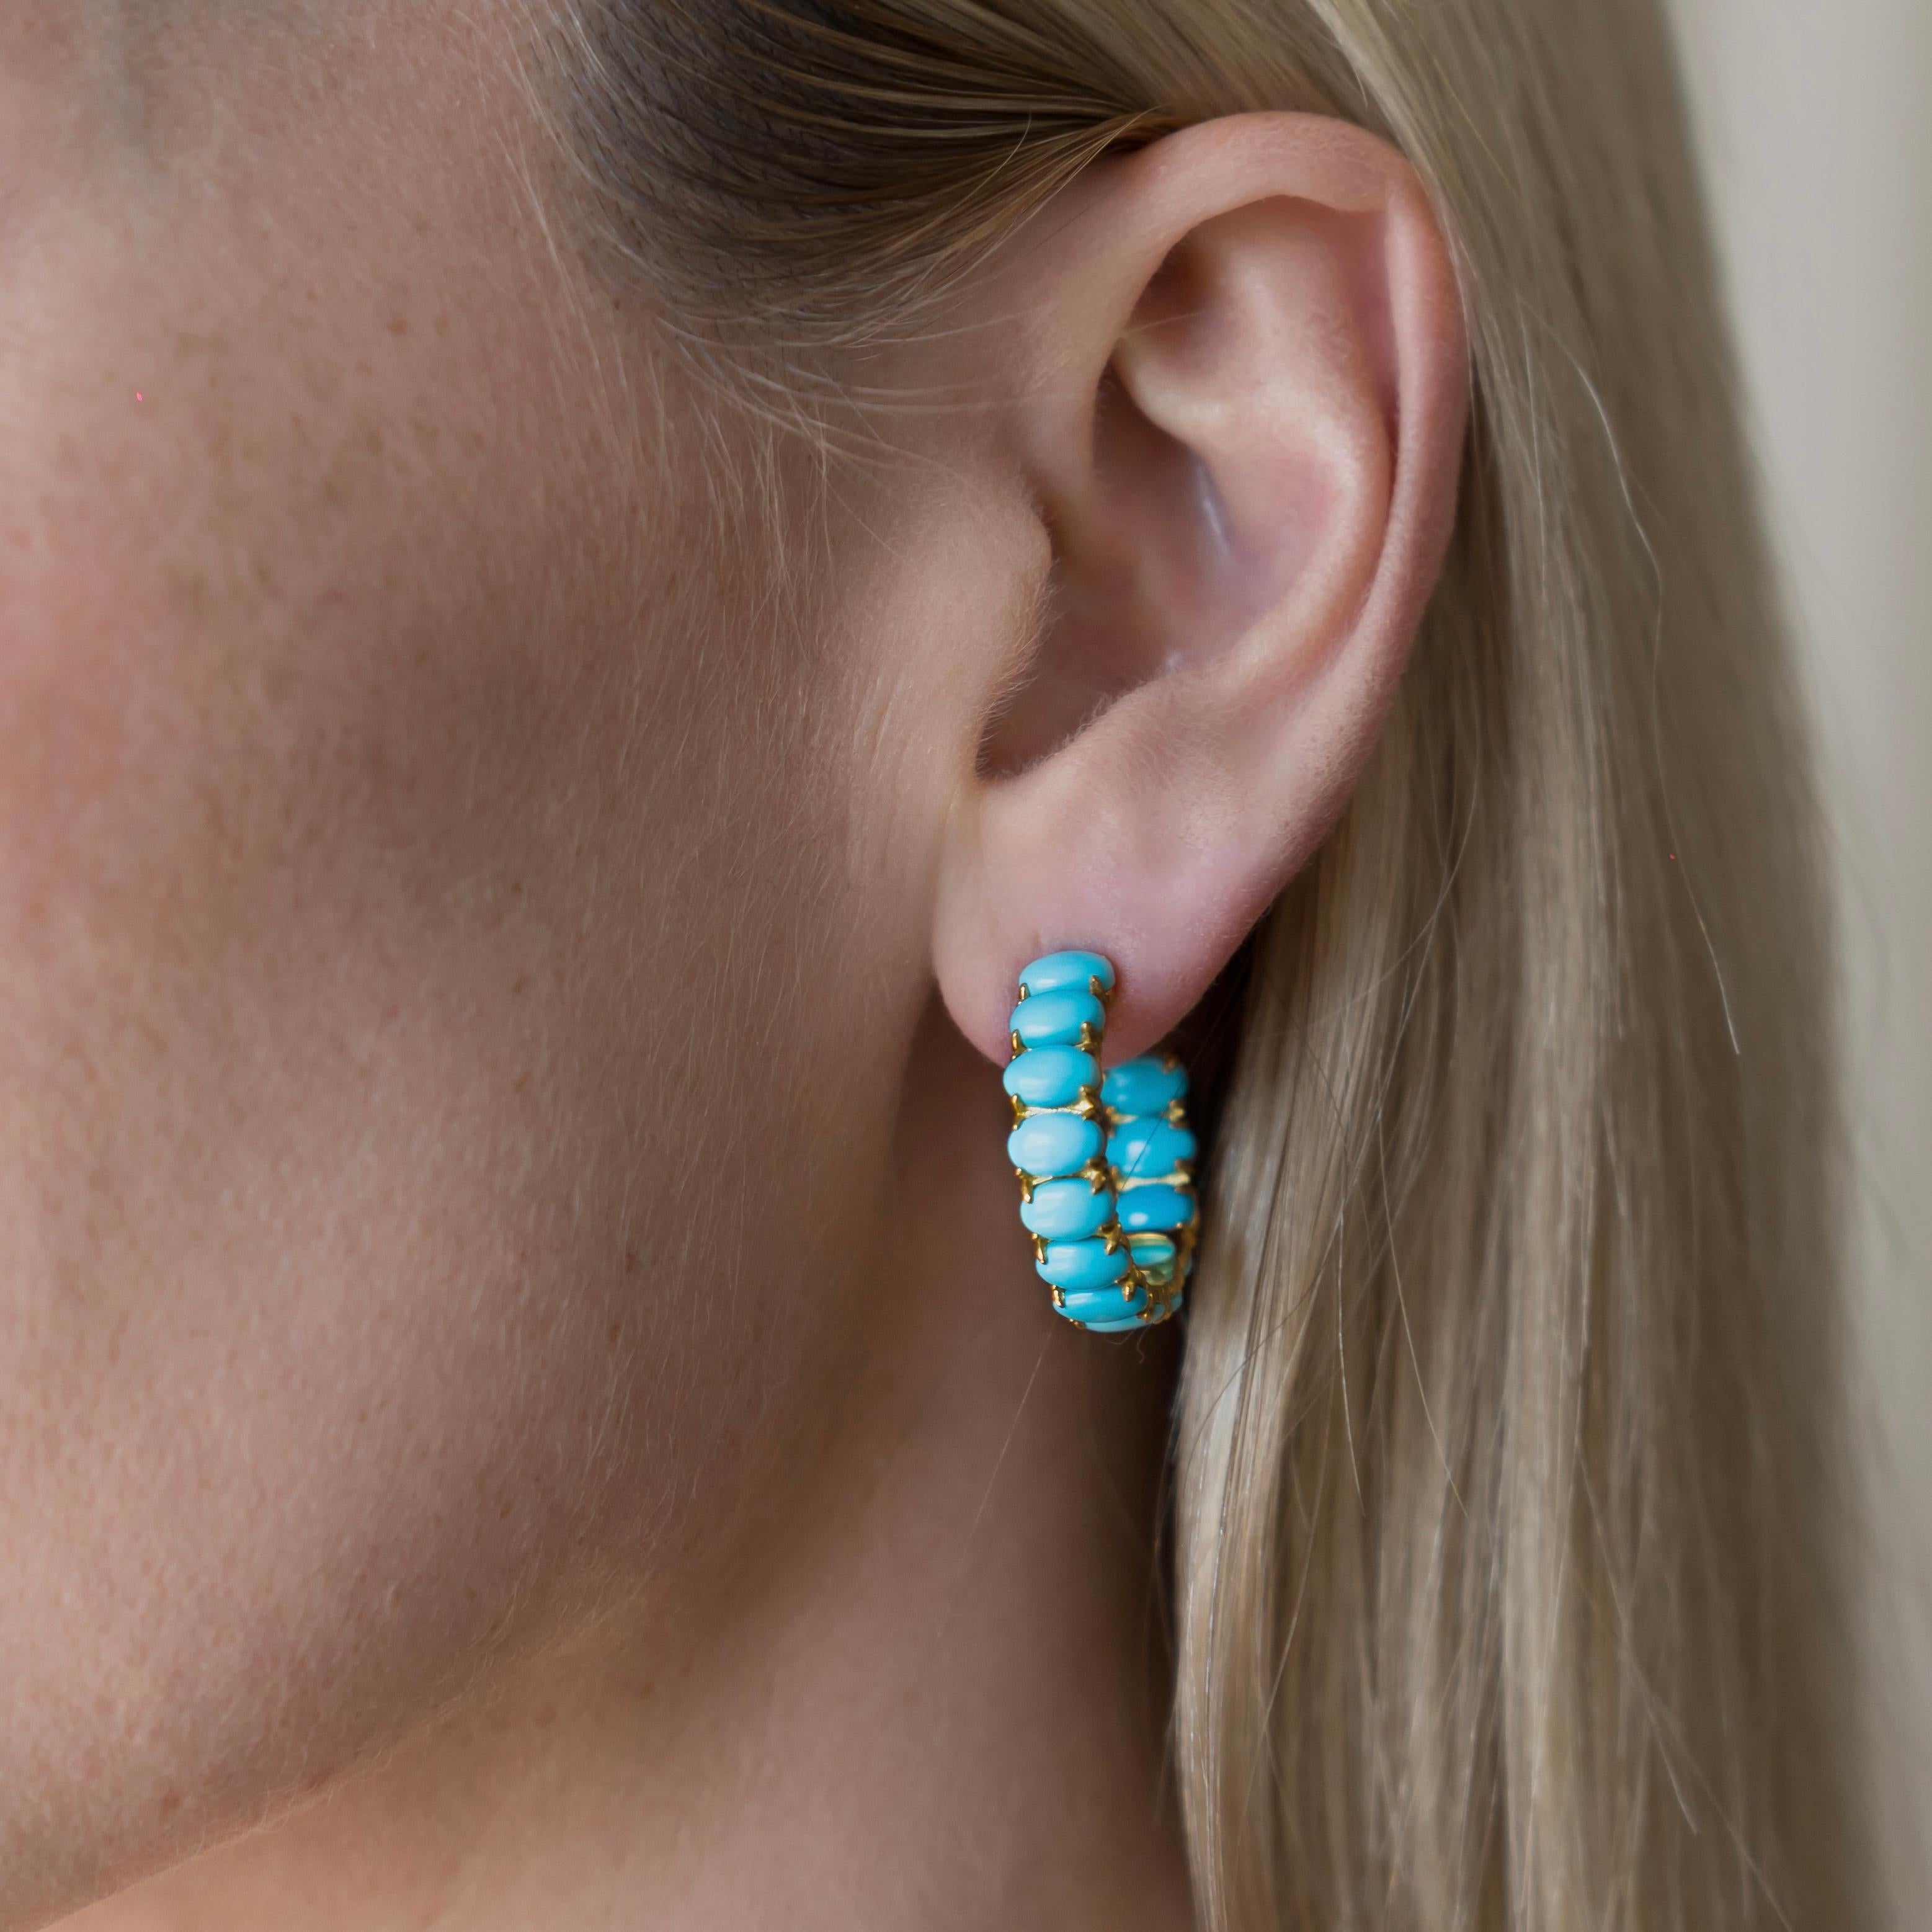 Nina Zhou's 10ct Turquoise Inside-out Hoop Earrings in 14k yellow gold encapsulate vibrant elegance with a modern twist. Crafted meticulously, these stunning hoops showcase richly hued, 10-carat turquoise gemstones set both inside and outside,